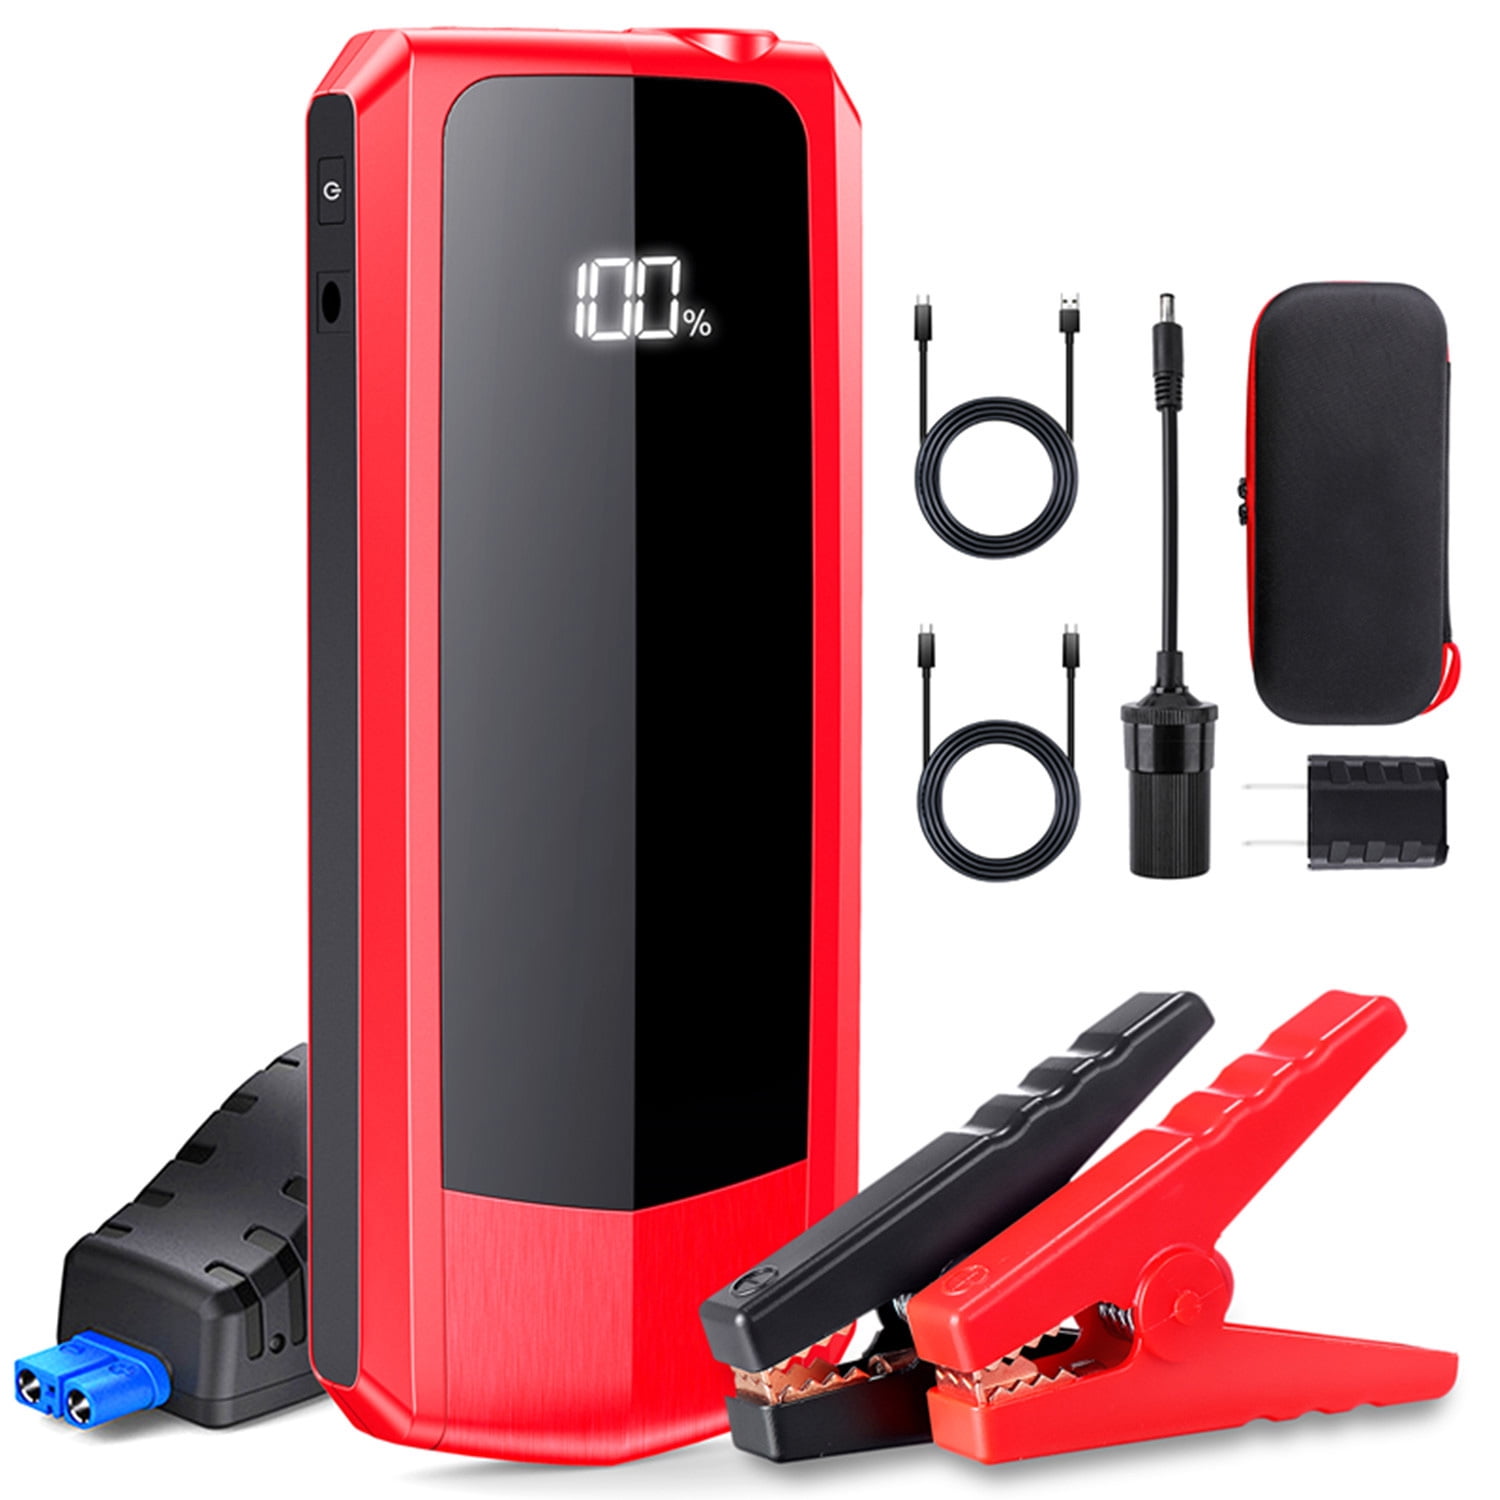 Audew Portable Jump Starter, 2000A Peak 20000mAh Auto Battery Jump Starter for All Gas Engines or Up To 8.5L Diesel Engines